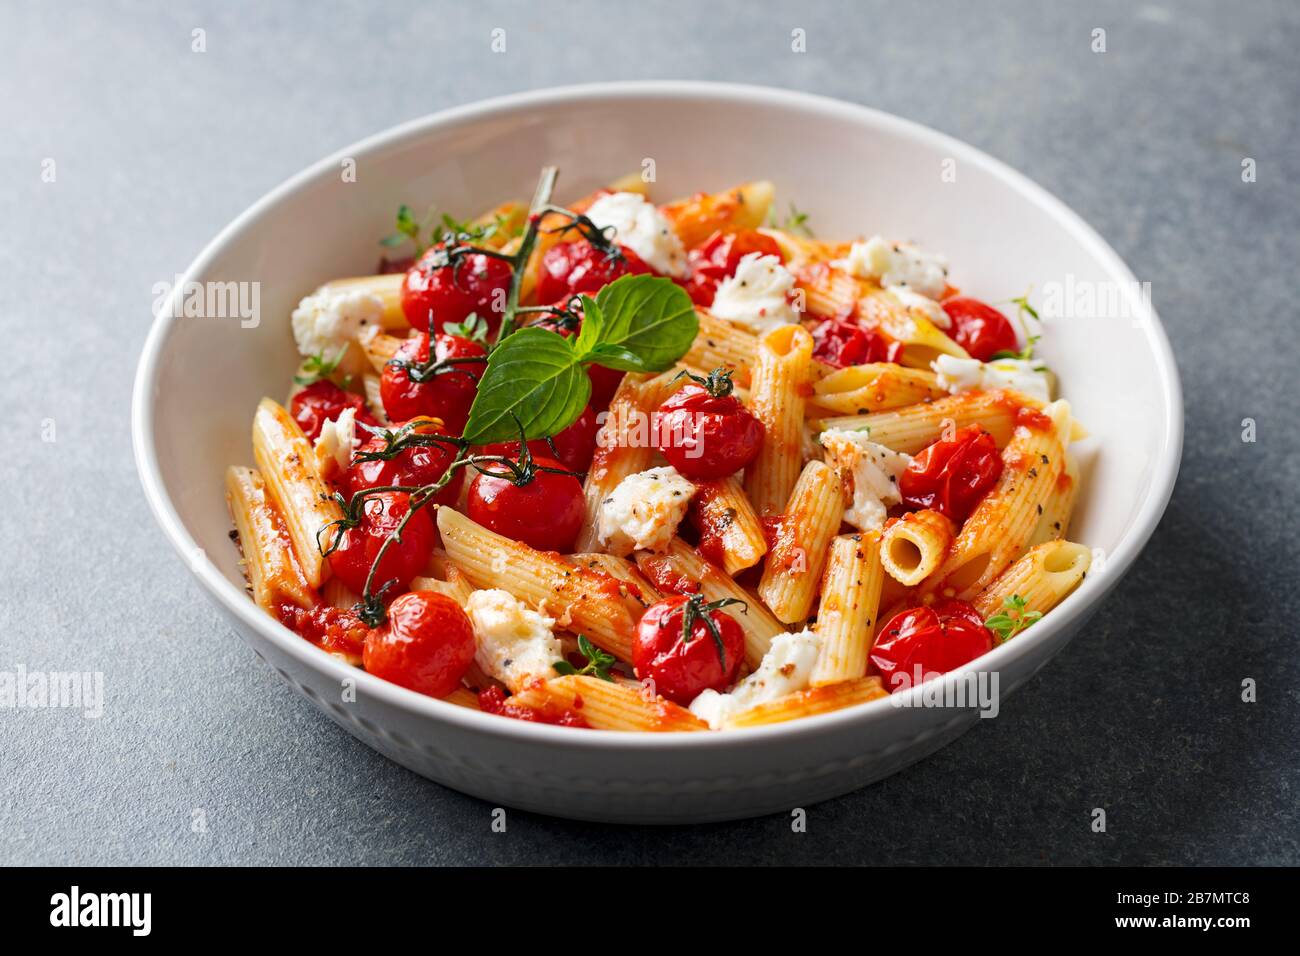 Pasta penne with roasted tomato, sauce, mozzarella cheese. Grey background. Close up. Stock Photo